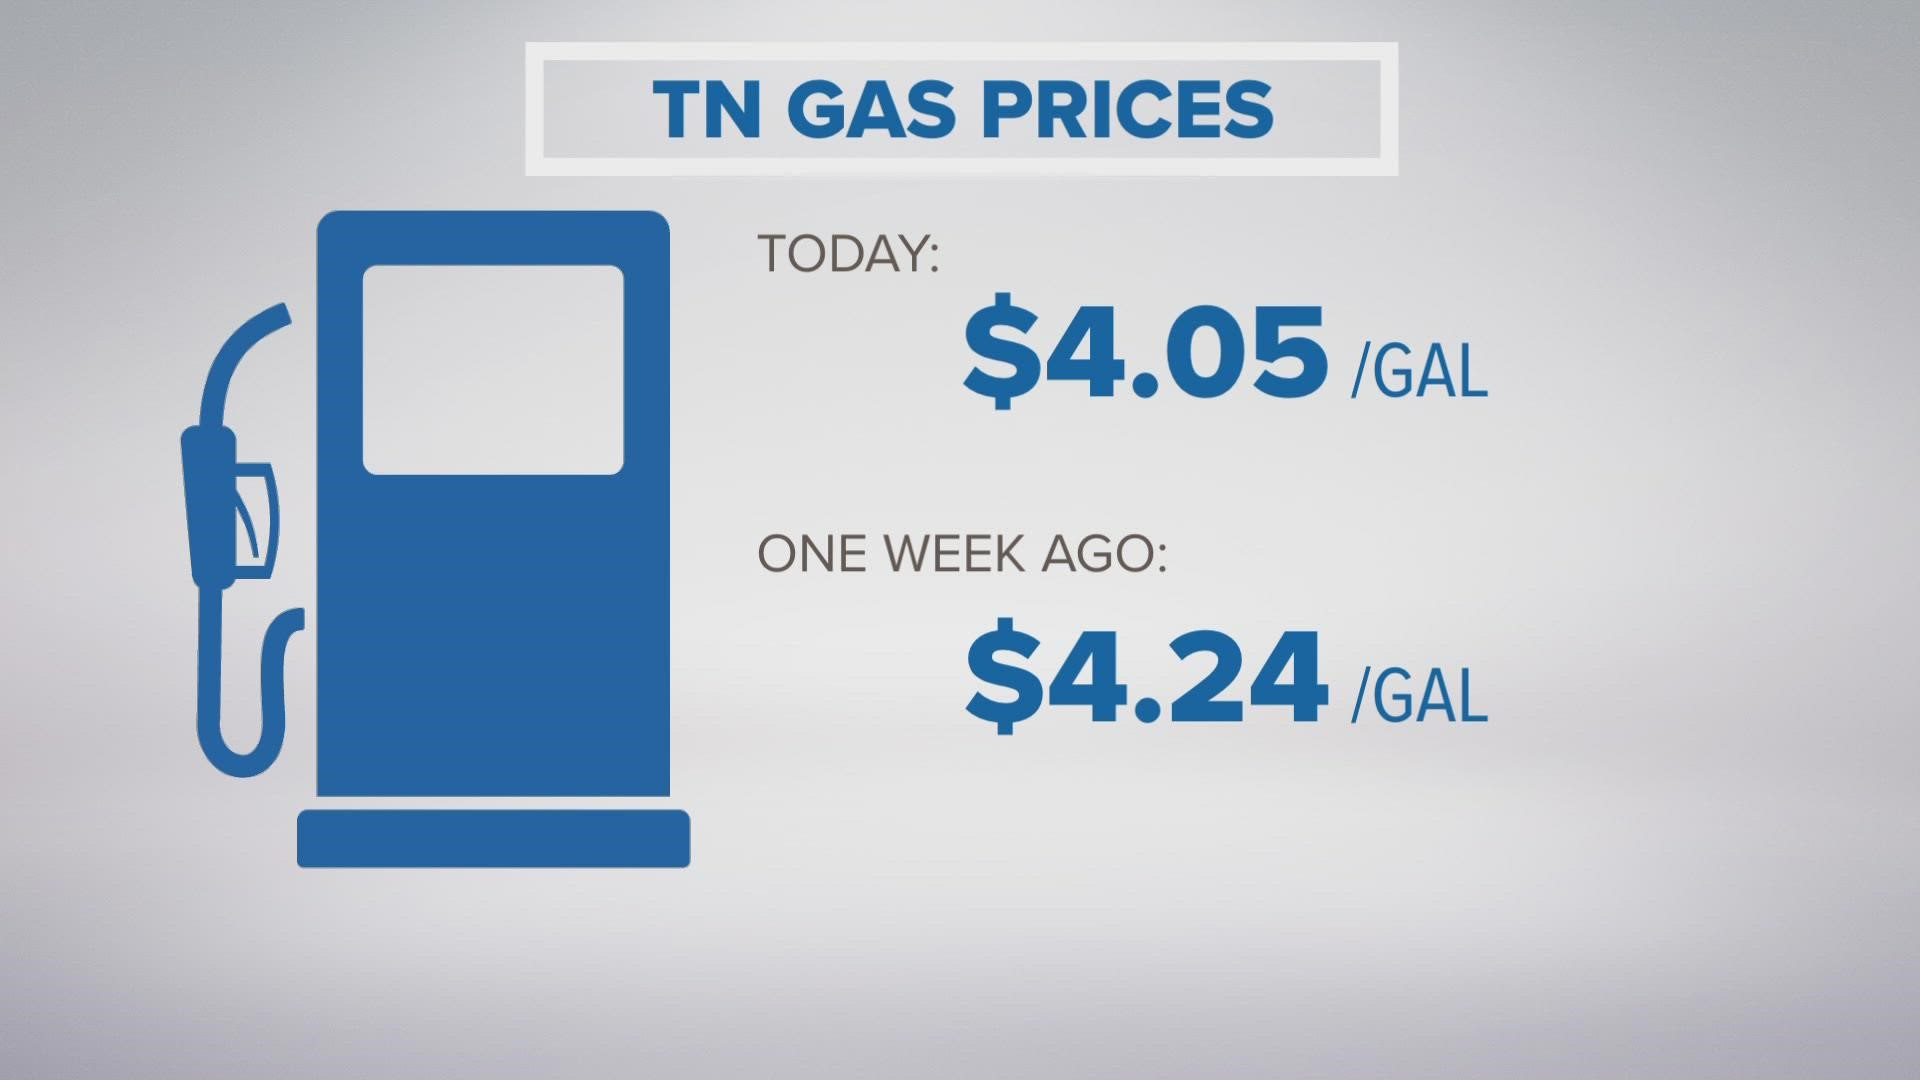 We're finally starting to see a consistent decline in gas prices throughout the U.S. and here in East Tennessee.